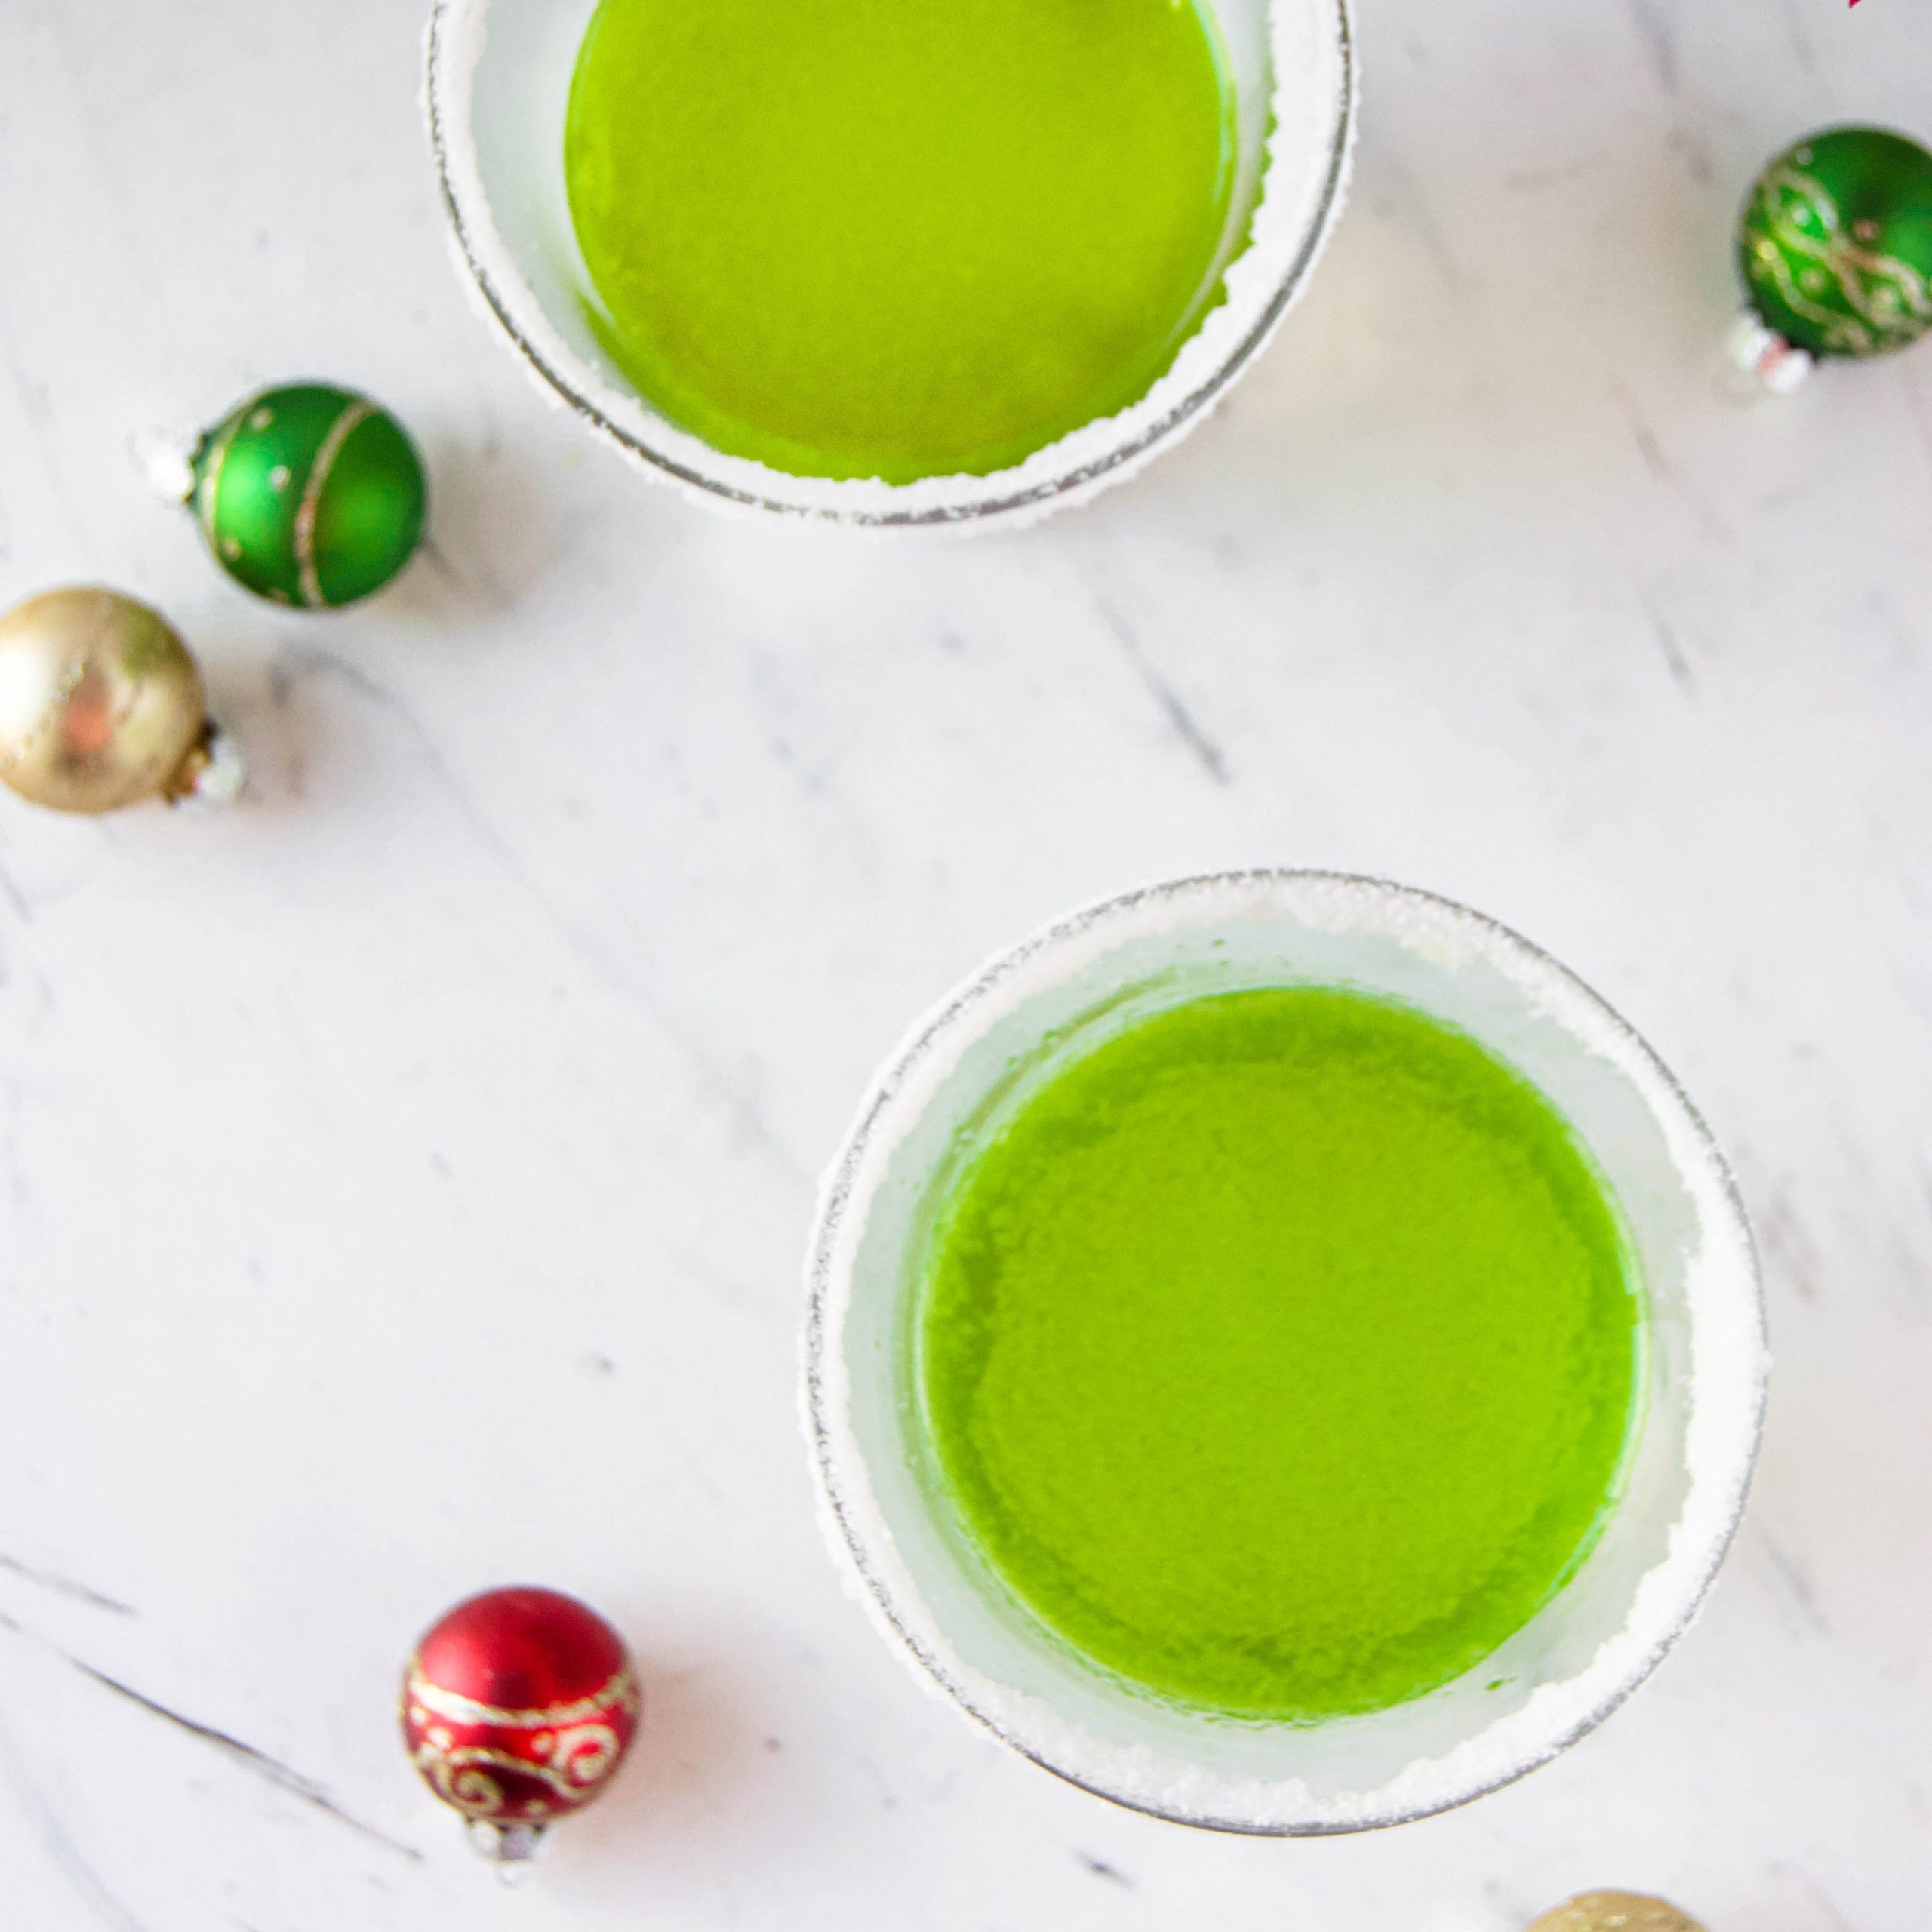 The Grinch cocktail